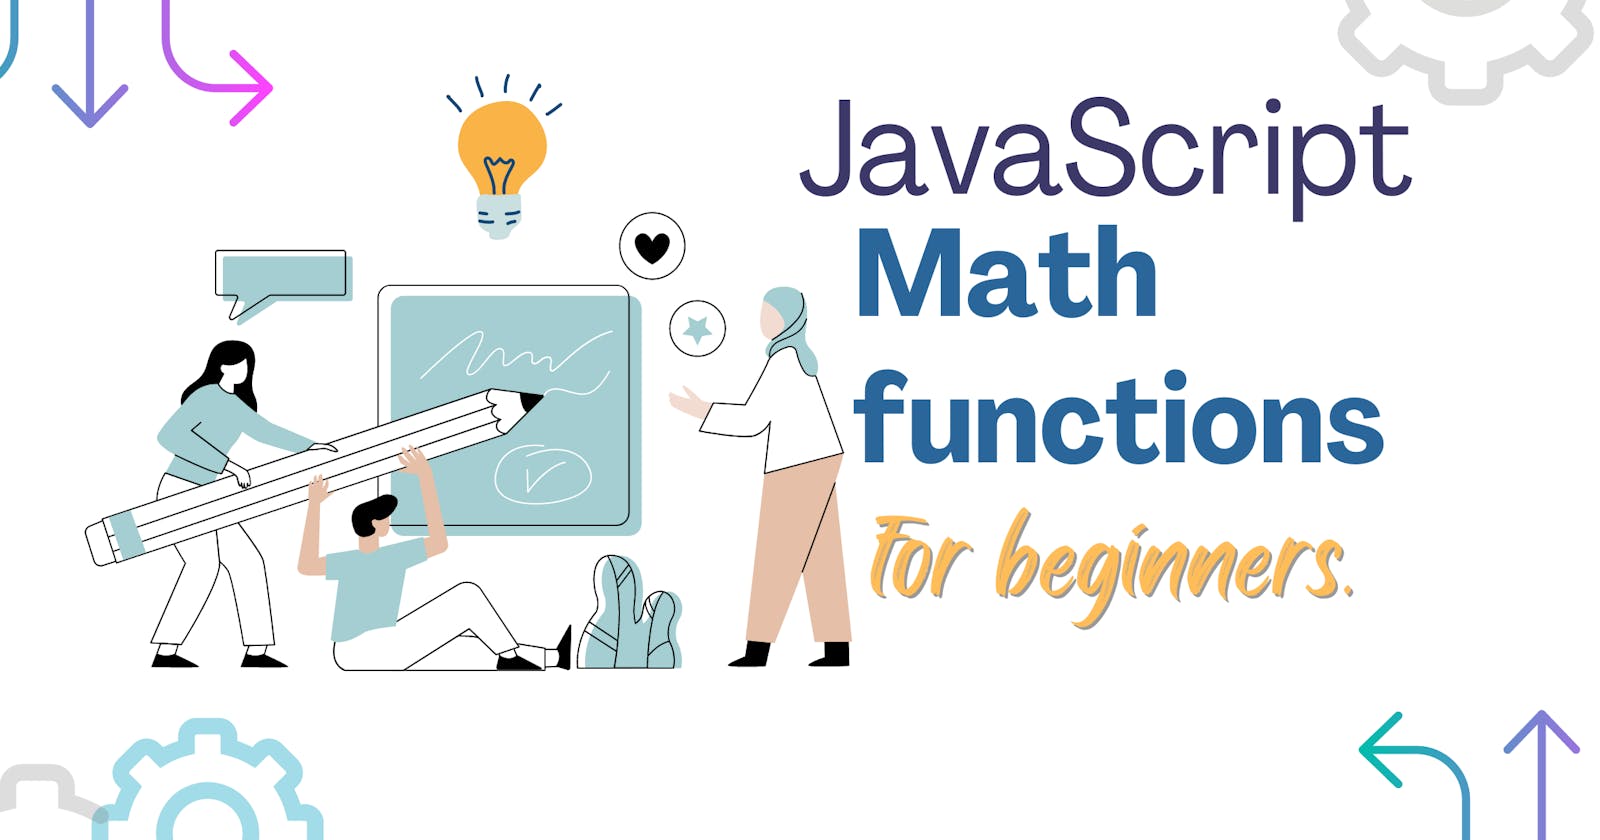 JavaScript Math functions for beginners.